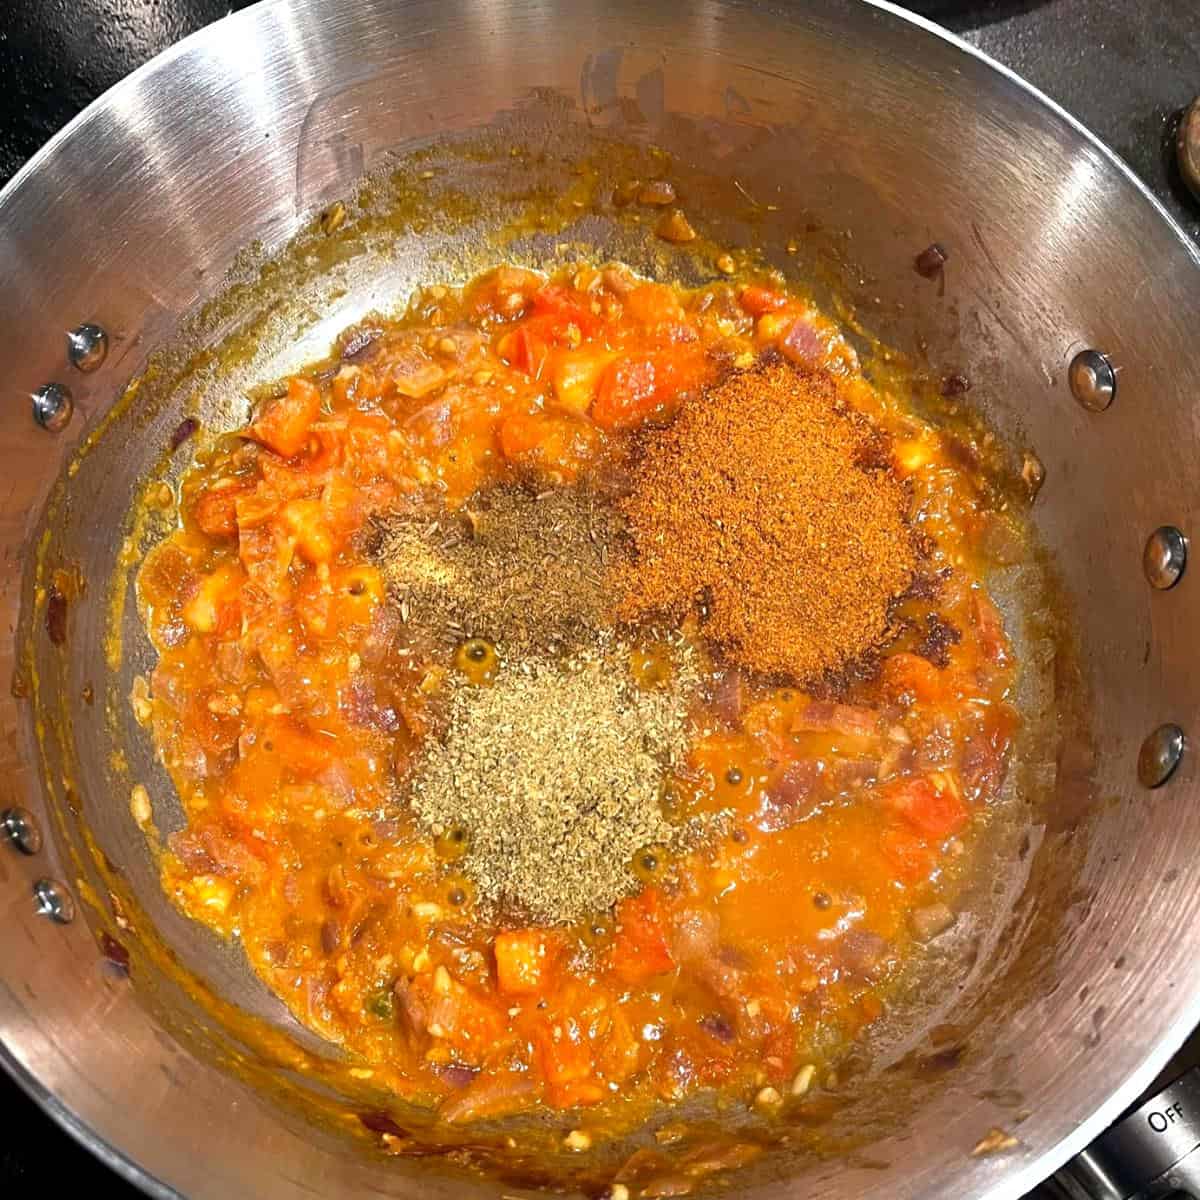 Berbere, coriander powder and cumin powder added to saucepan with tomatoes and onions.